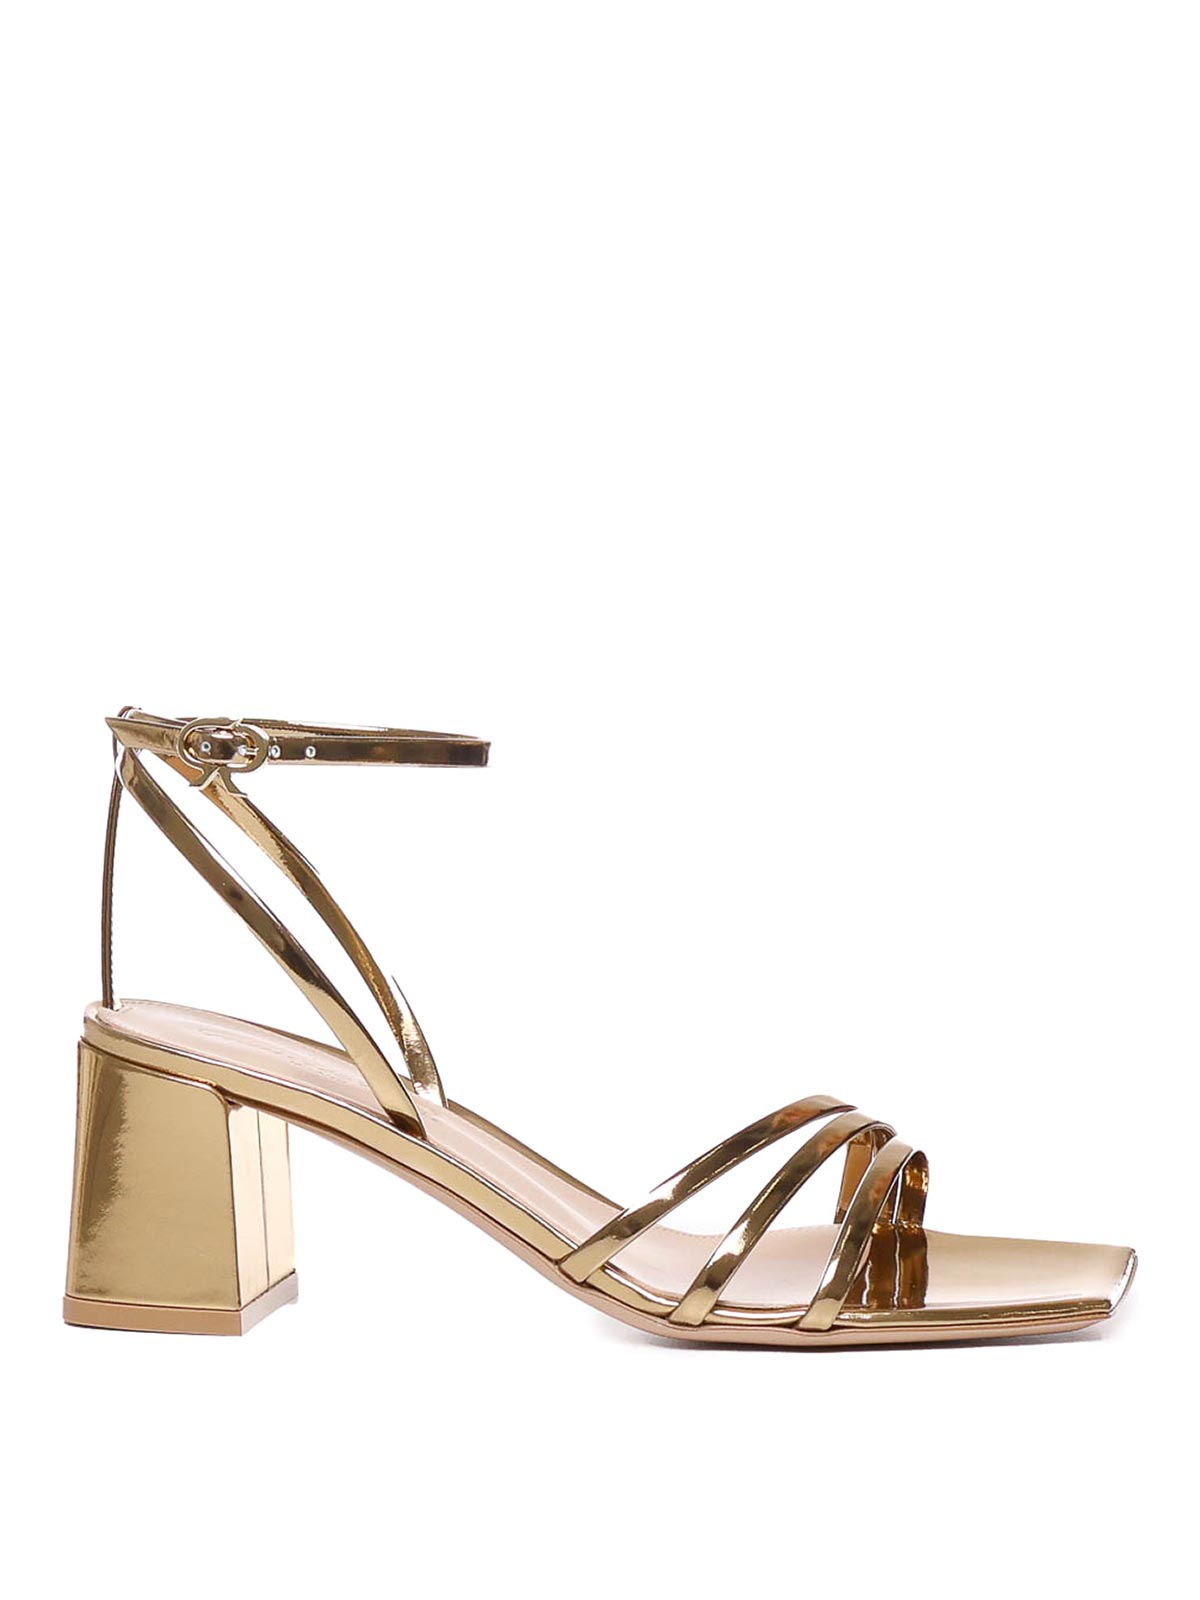 Gianvito Rossi Patent Leather Sandals In Beige